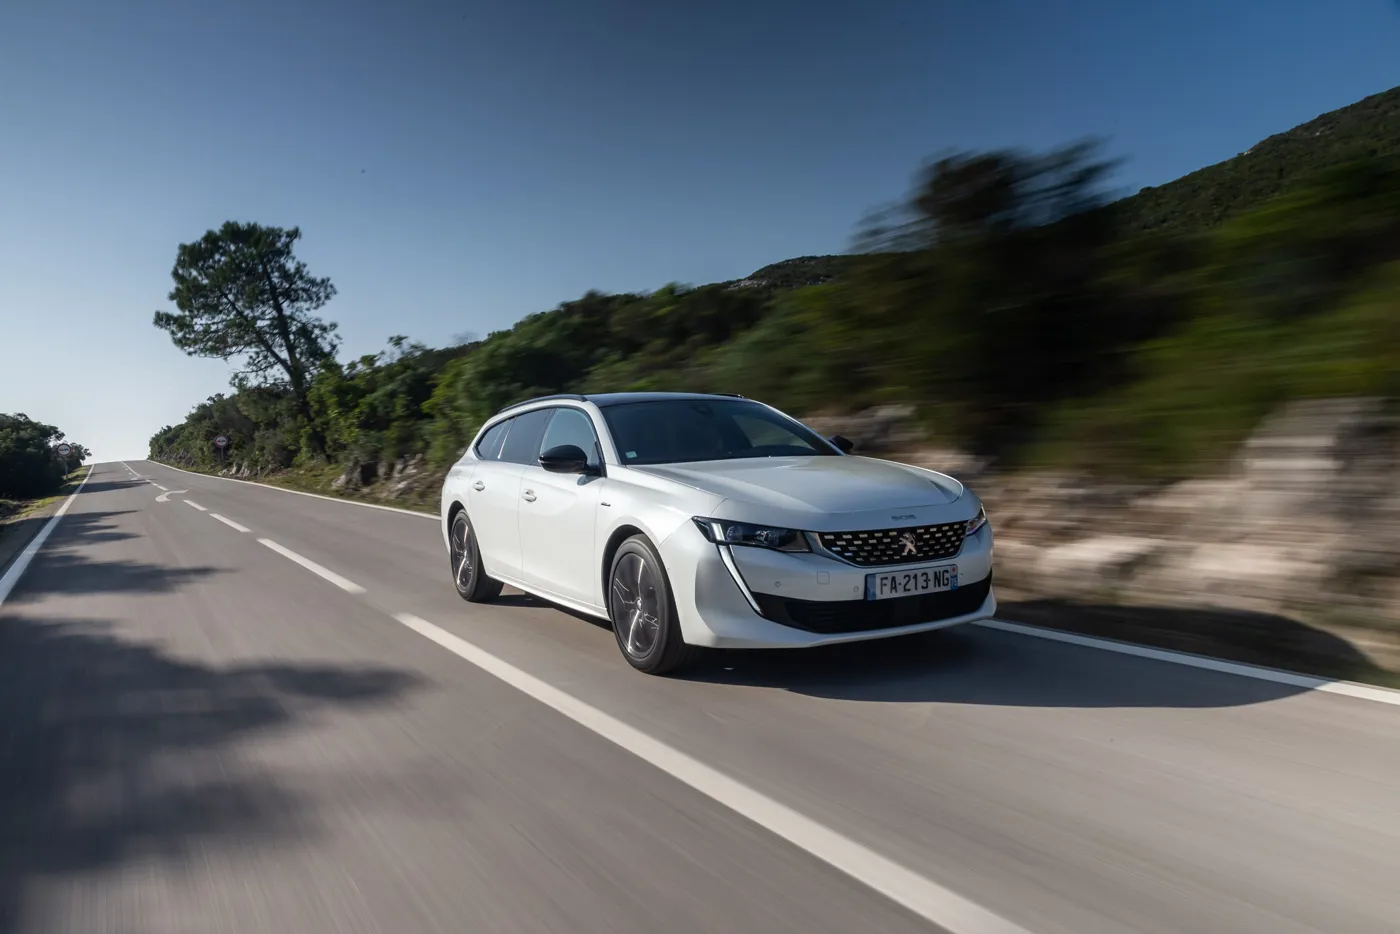 Peugeot 508 SW aims to occupy middle ground in estate car market